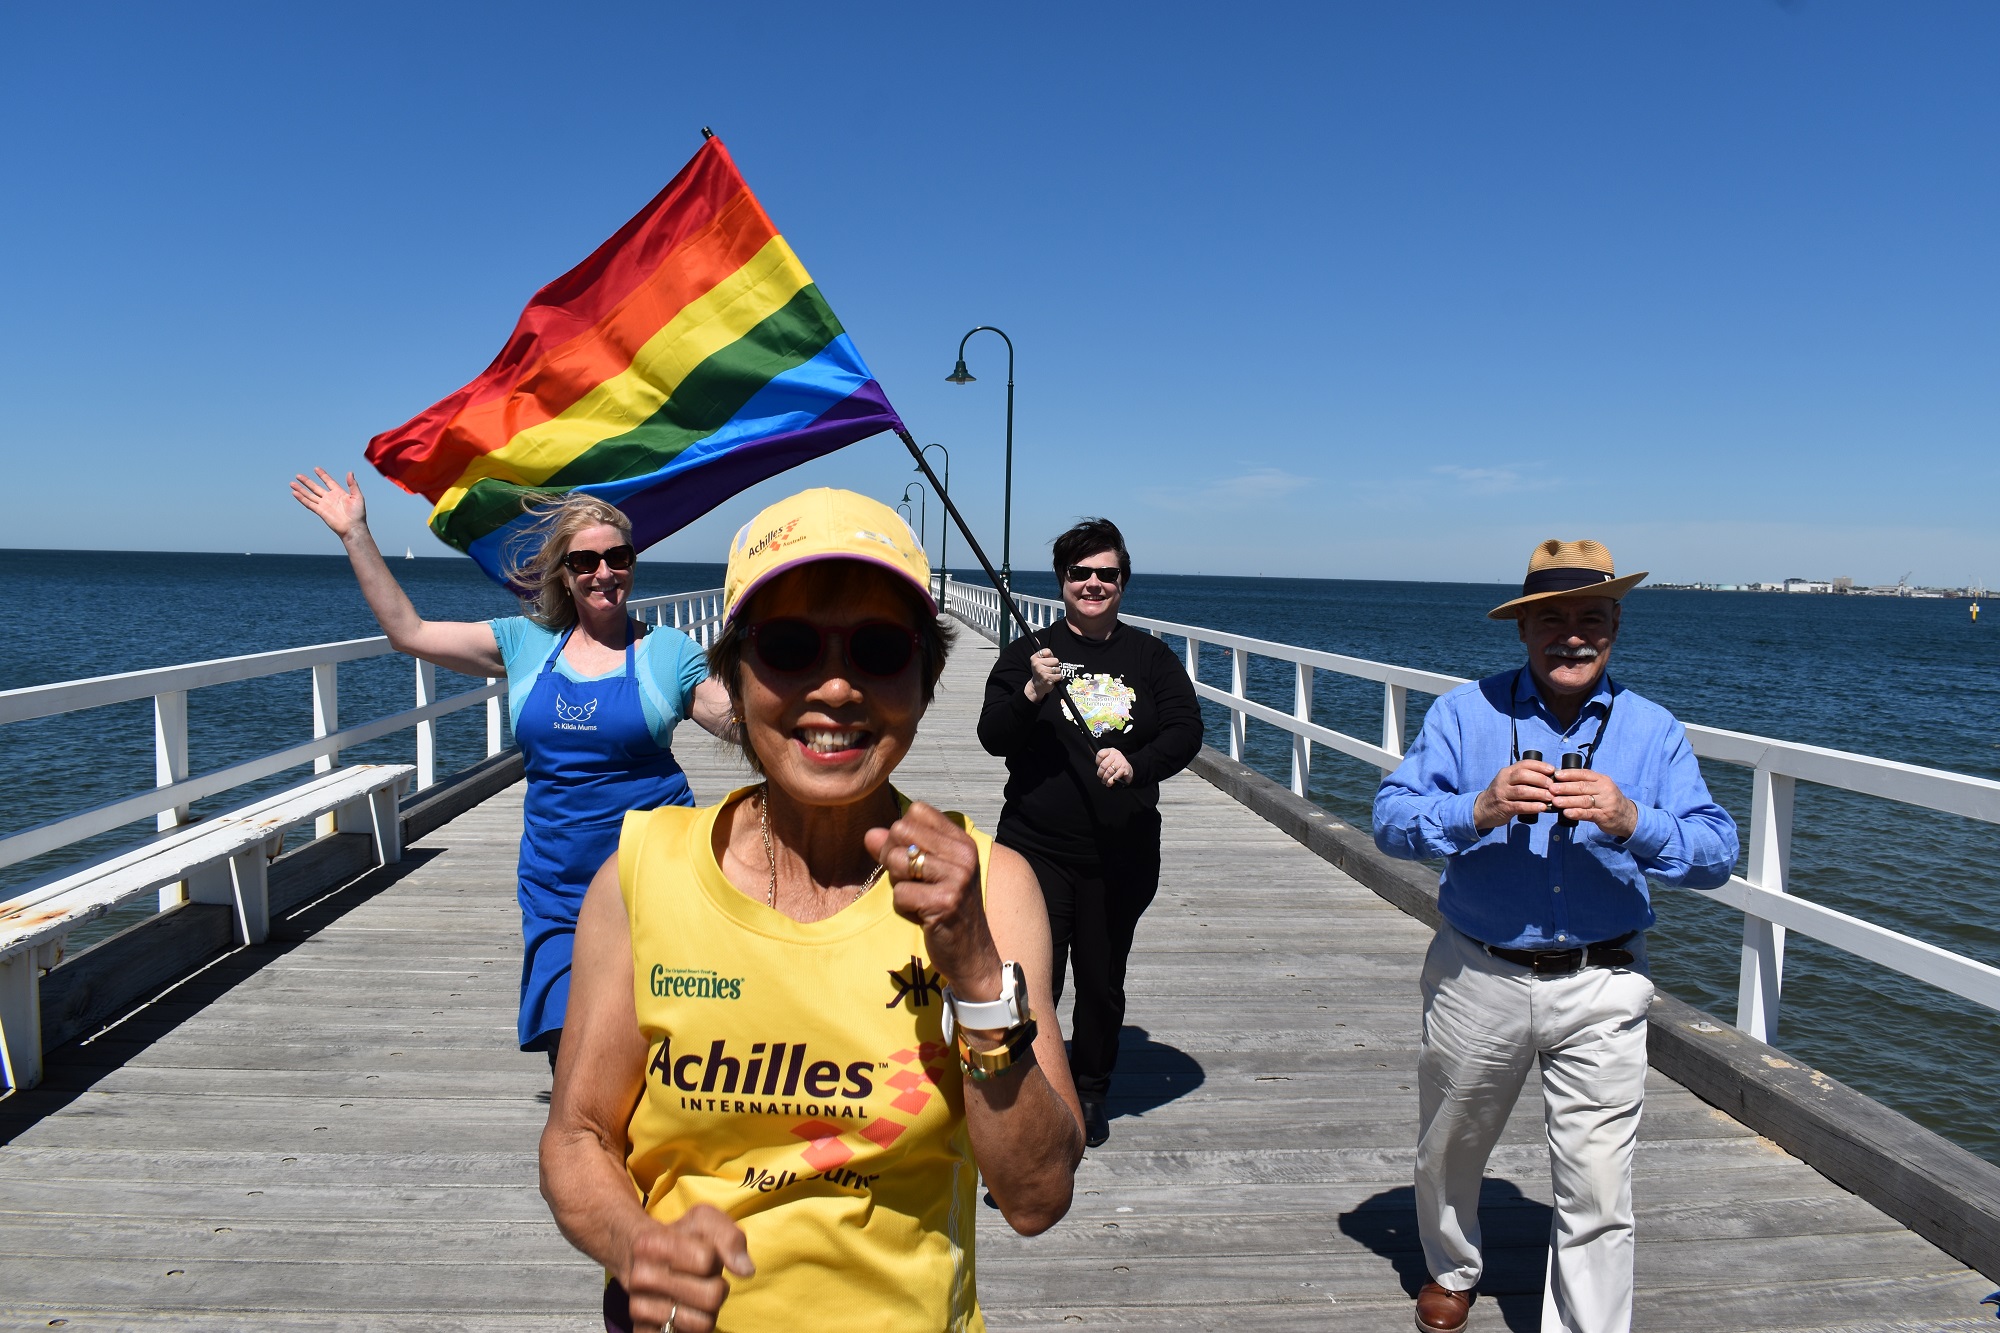 Four people walking on a jetty, the back two holding a large Pride flag